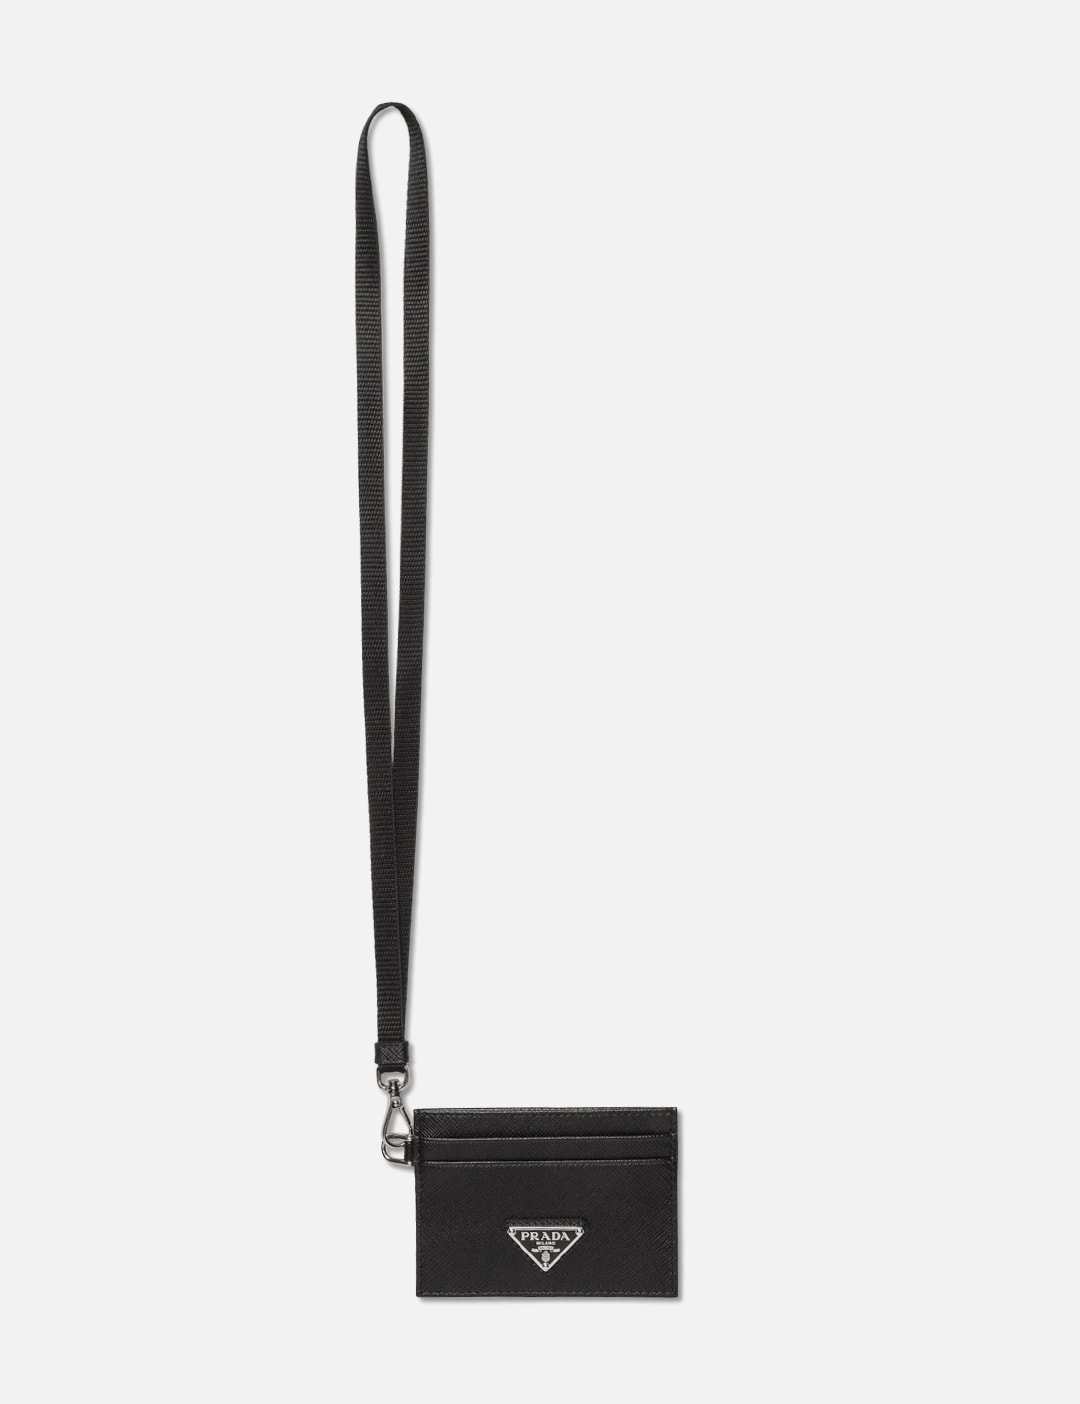 Prada Brushed Leather Crad Holder With Strap in Black